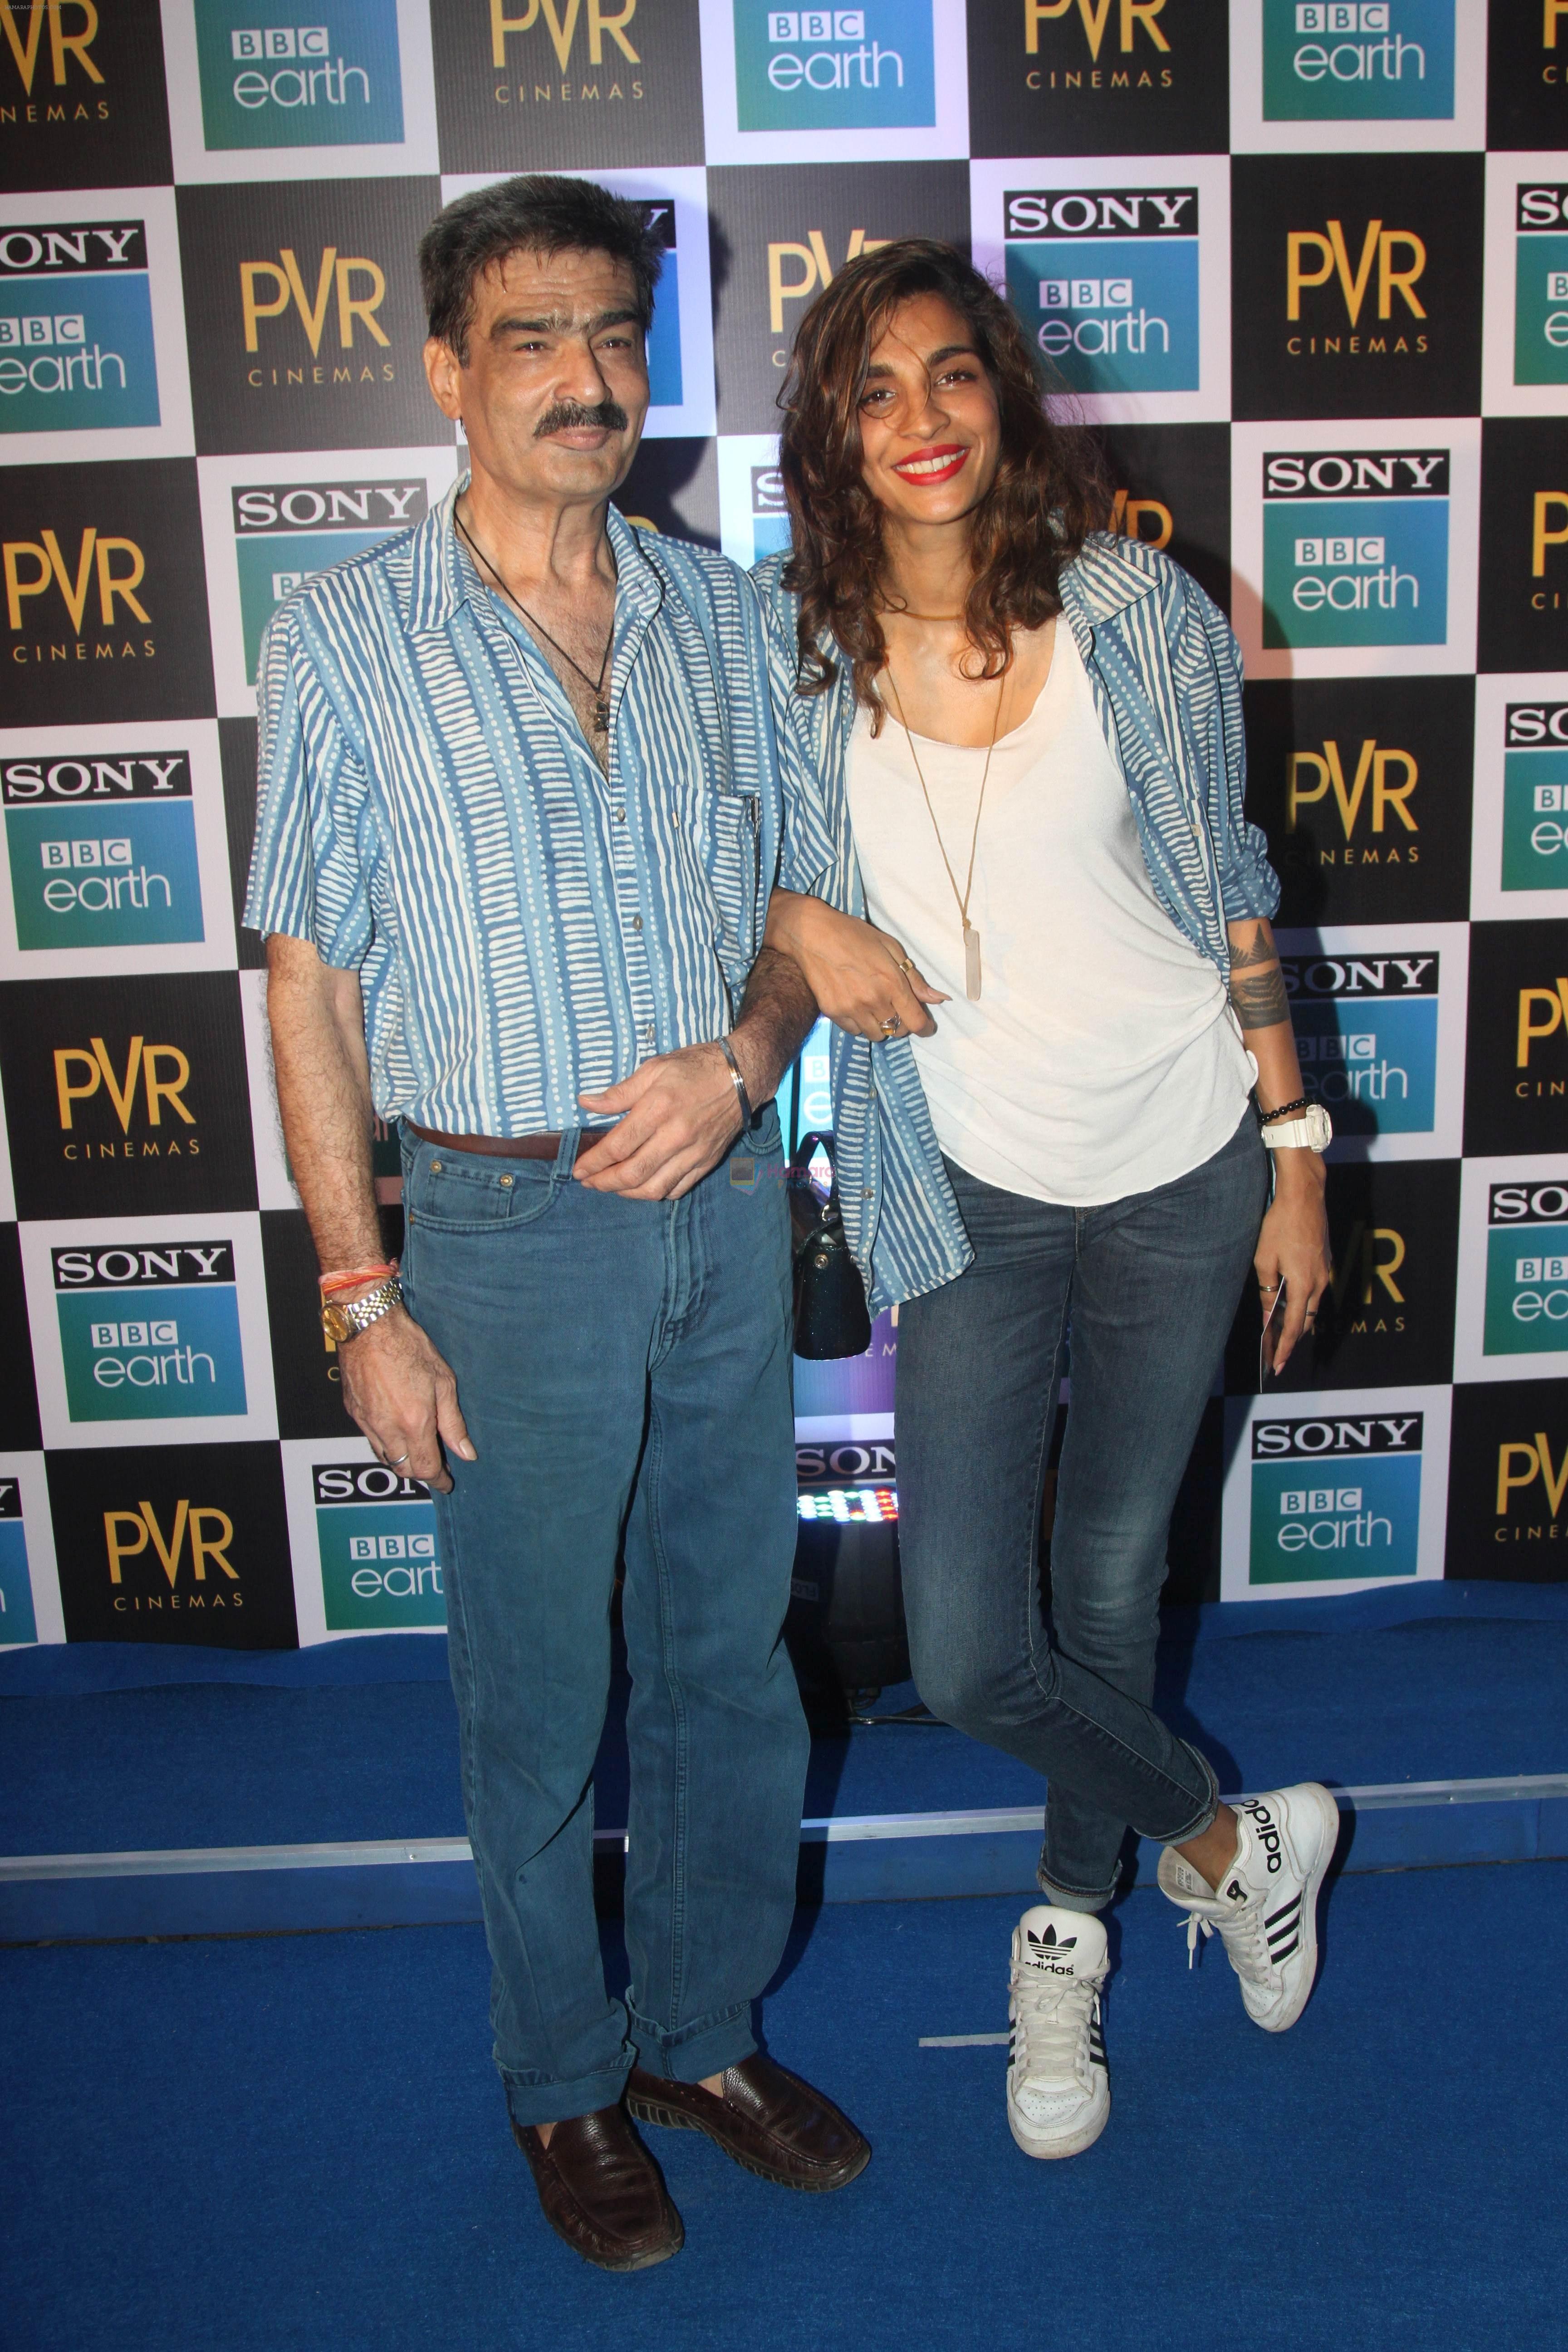 Anushka Manchanda at the Screening of Sony BBC Earth's film Blue Planet 2 at pvr icon in andheri on 15th May 2018